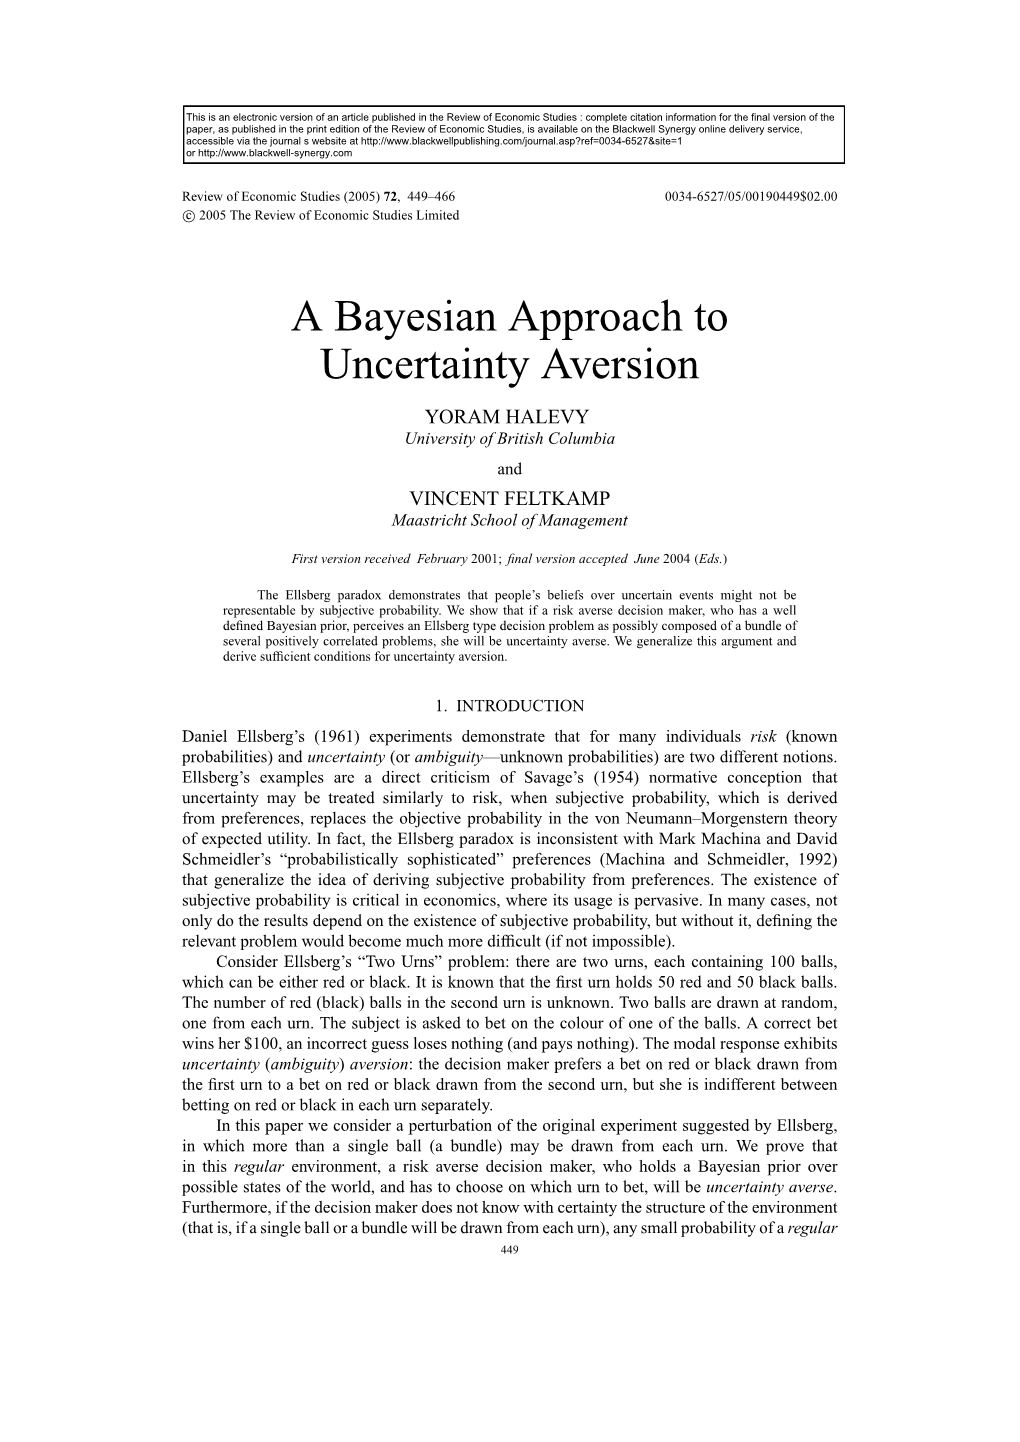 A Bayesian Approach to Uncertainty Aversion YORAM HALEVY University of British Columbia and VINCENT FELTKAMP Maastricht School of Management